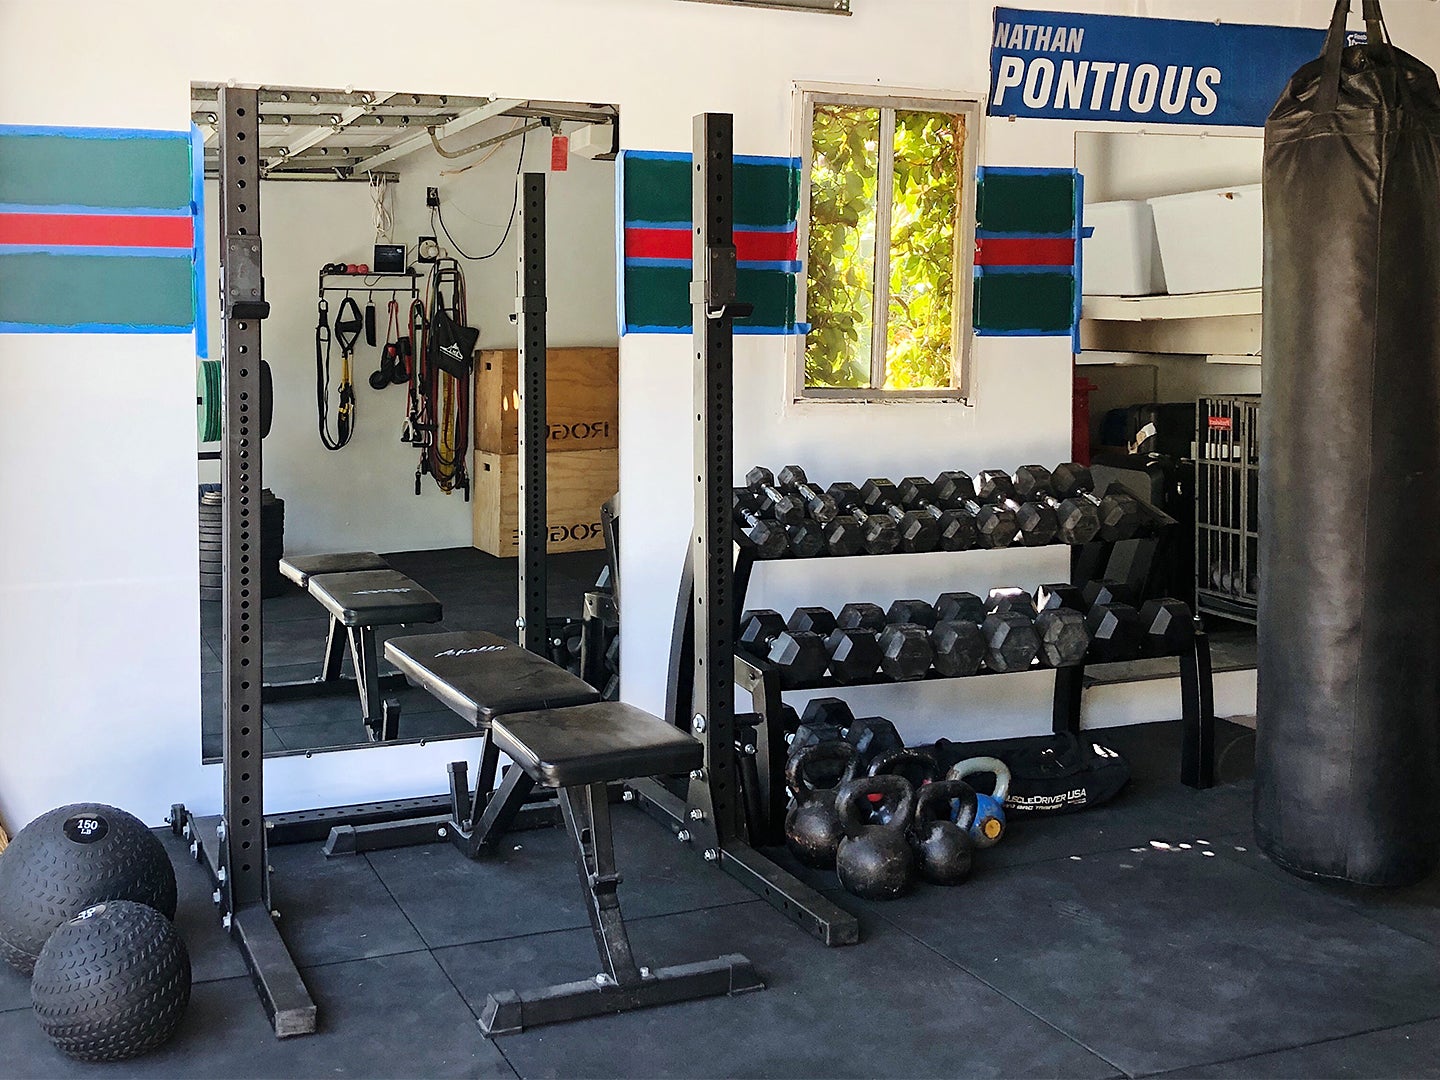 Wall-to-Wall Built-Ins Hide All the Utilitarian Odds and Ends in This Garage-Turned-Gym